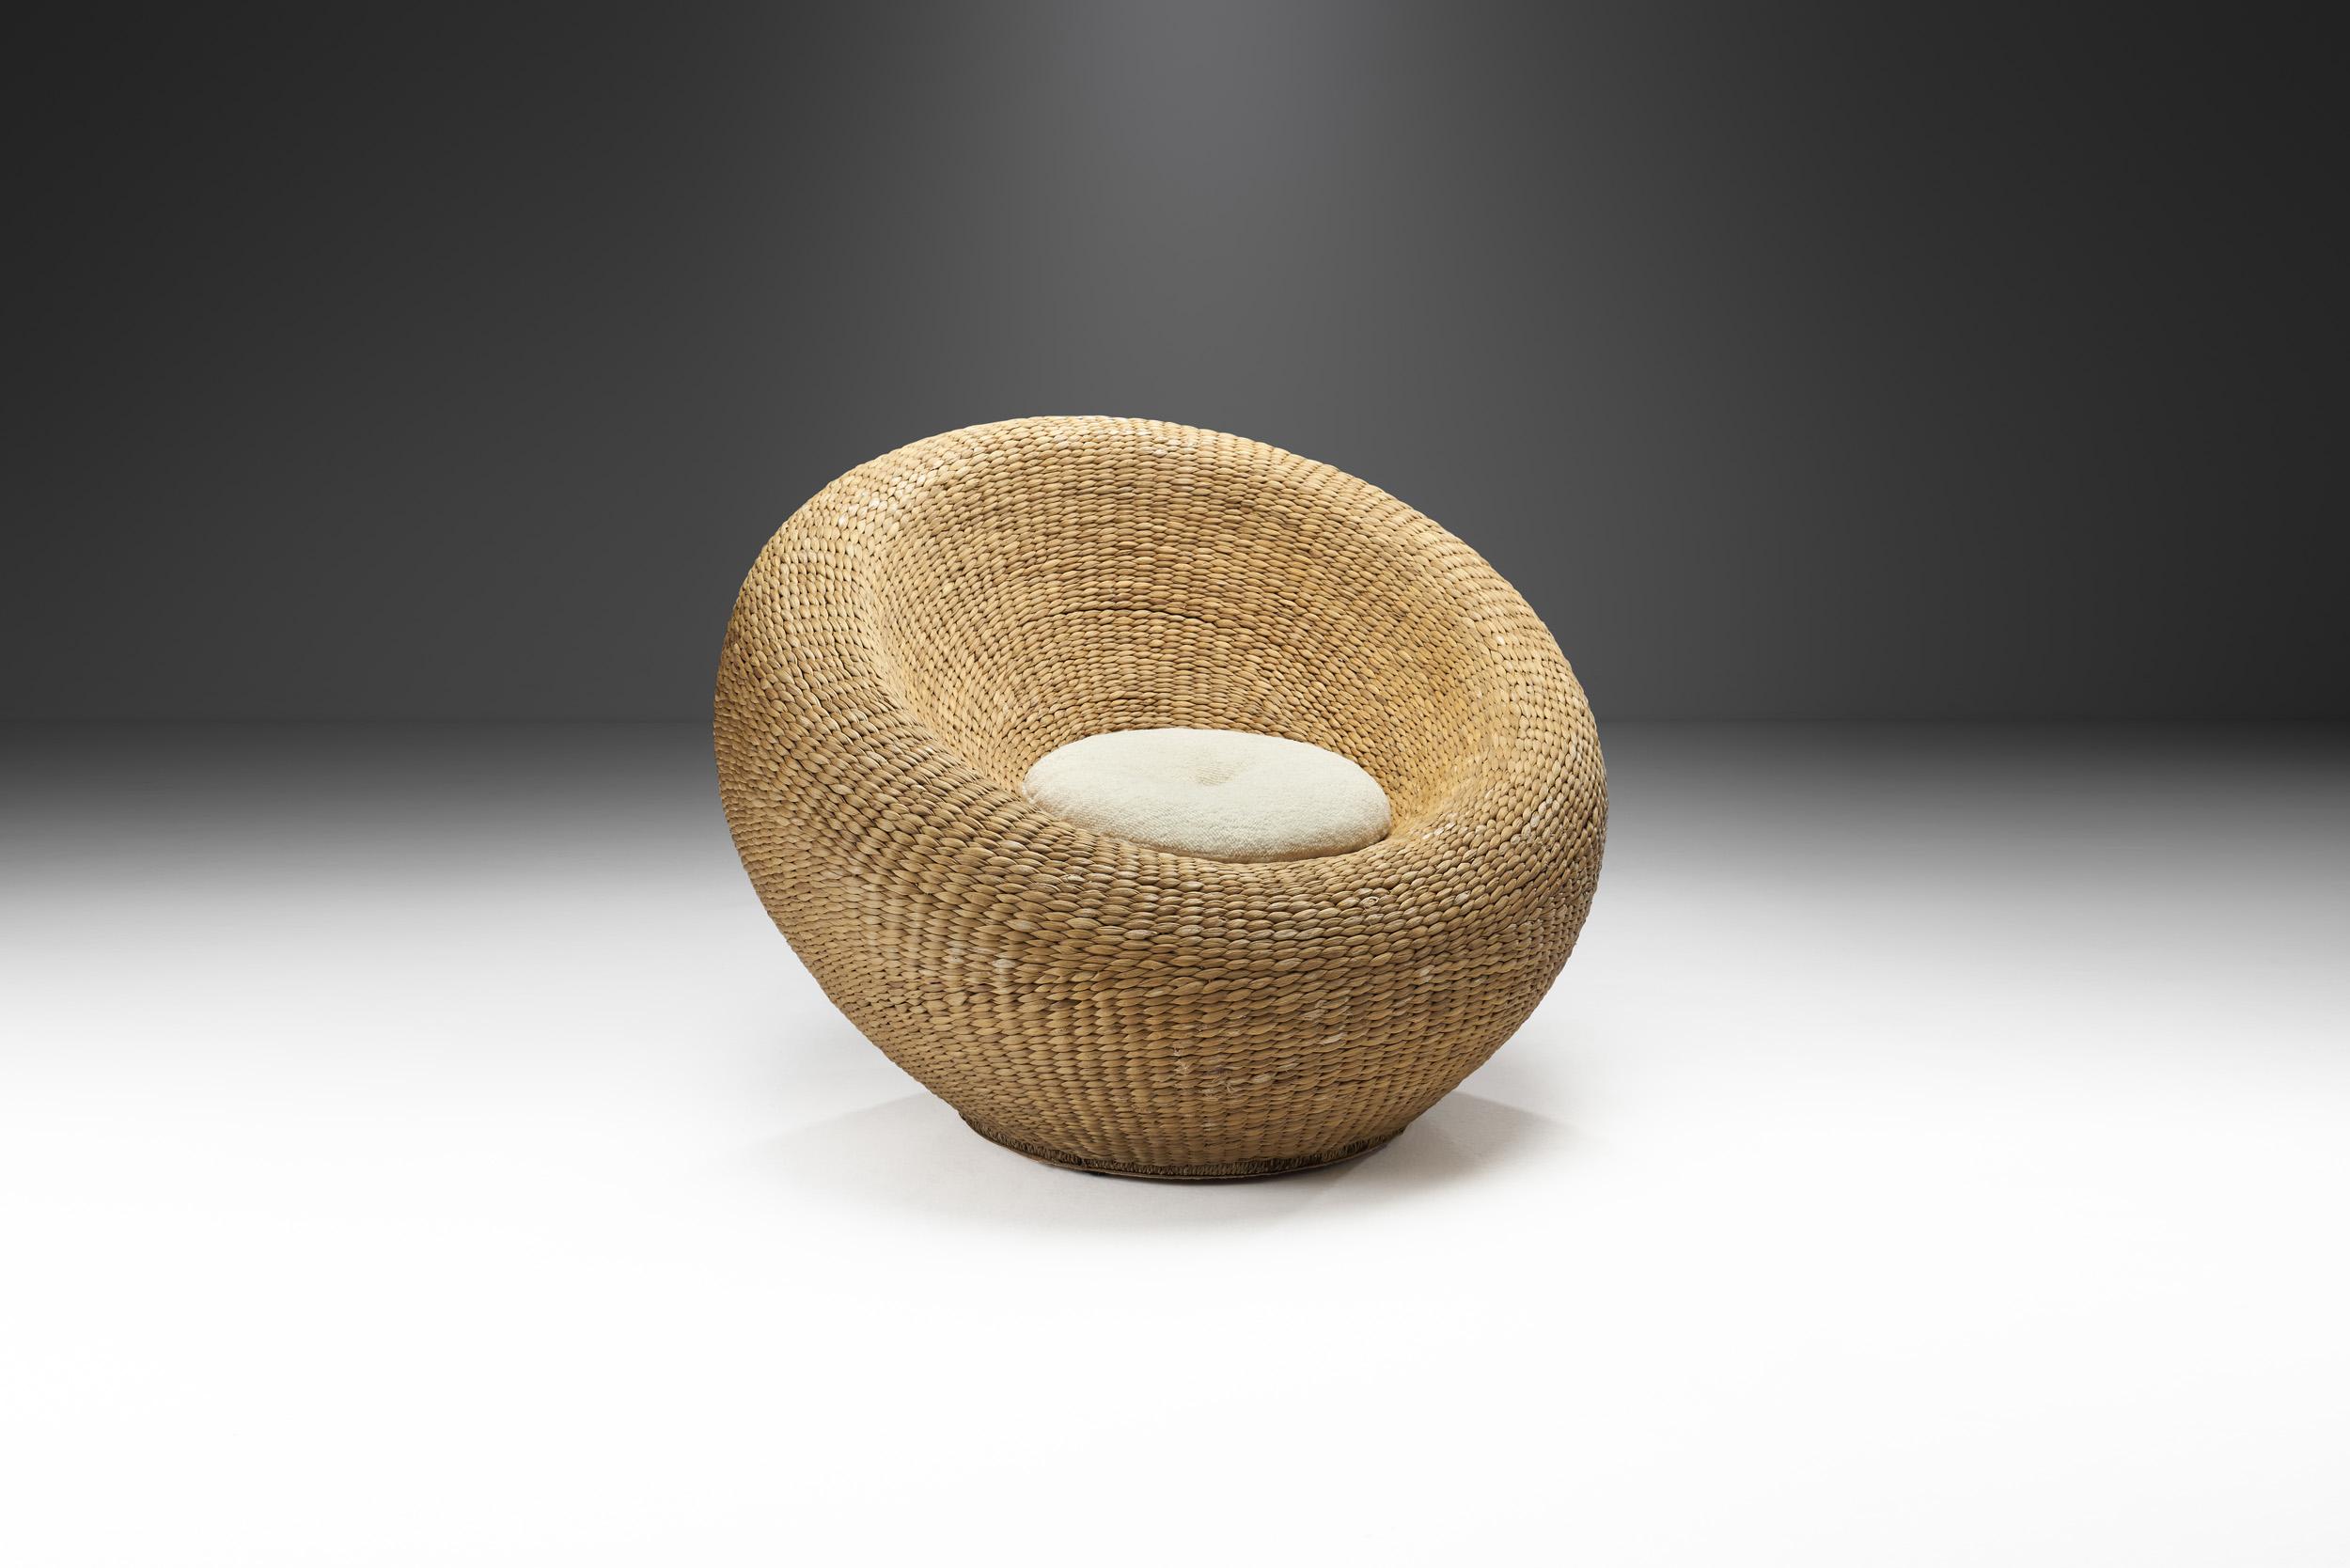 There are relatively many forms of lounge chair designs, and among them, the “bird’s nest” types are the cosiest. This model, in the manner of Isamu Kenmochi’s world-famous design, offers visual and functional comfort, premium materials and